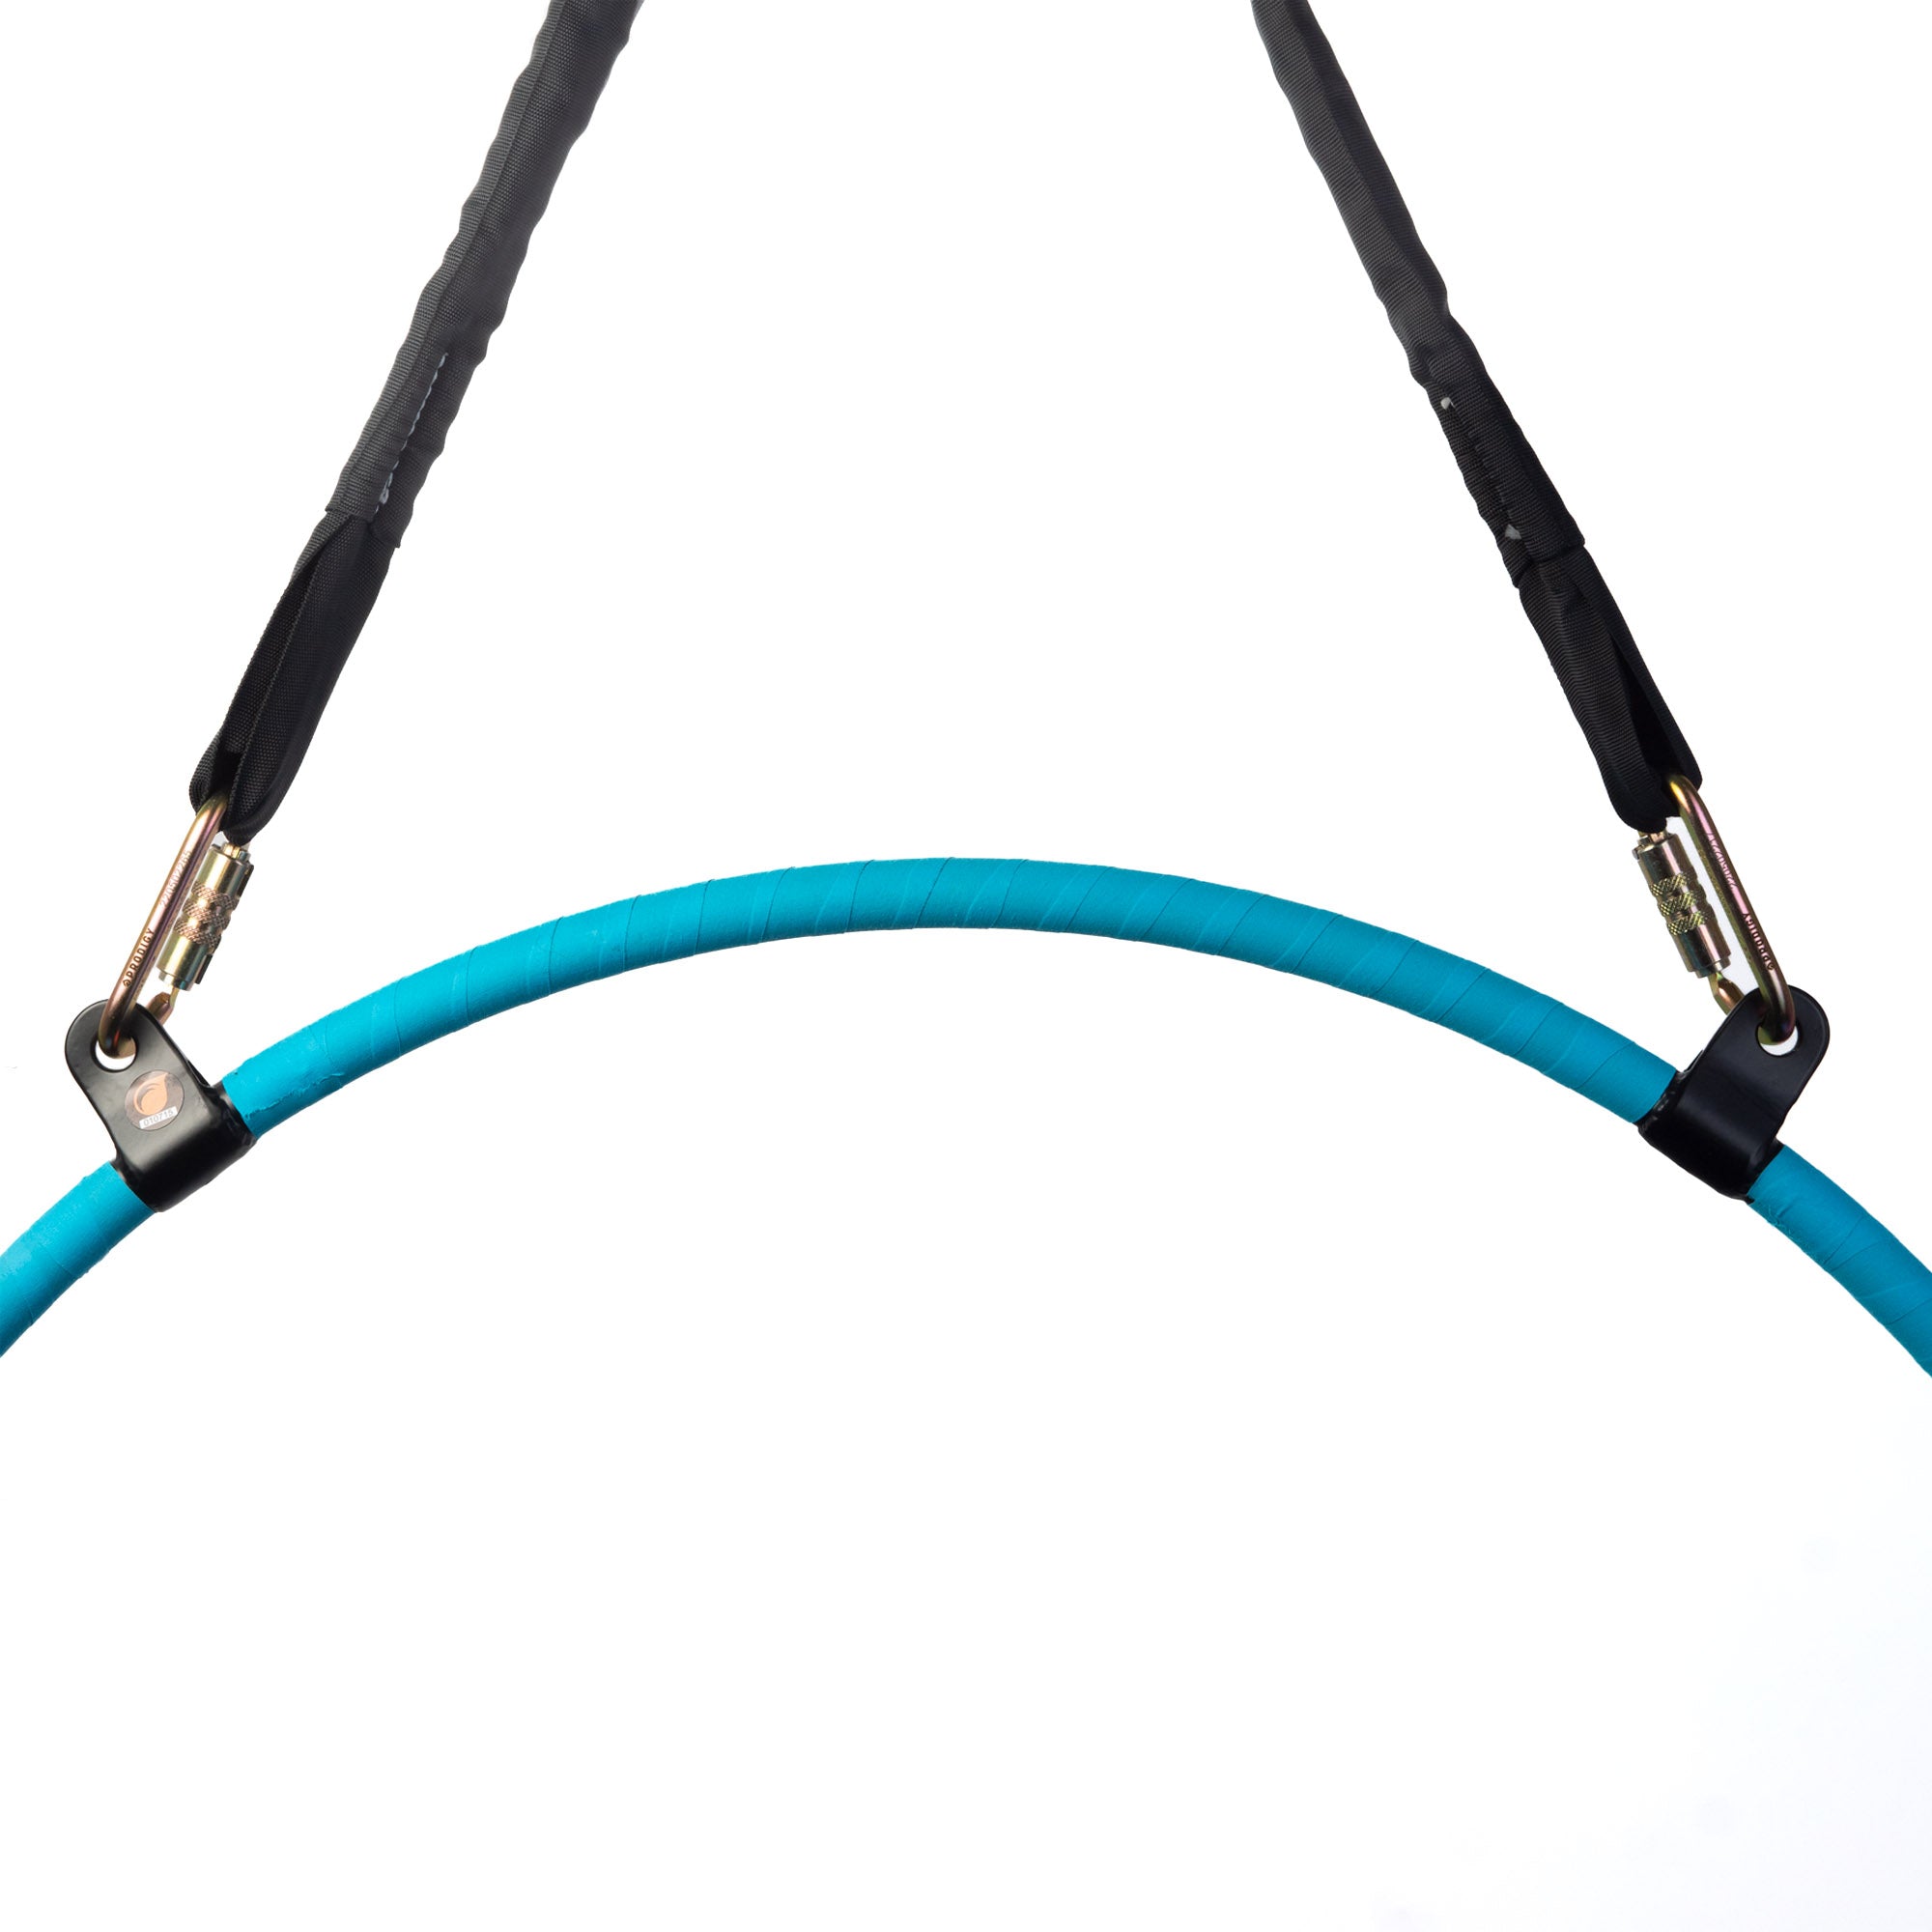 offset oval carabiner rigged